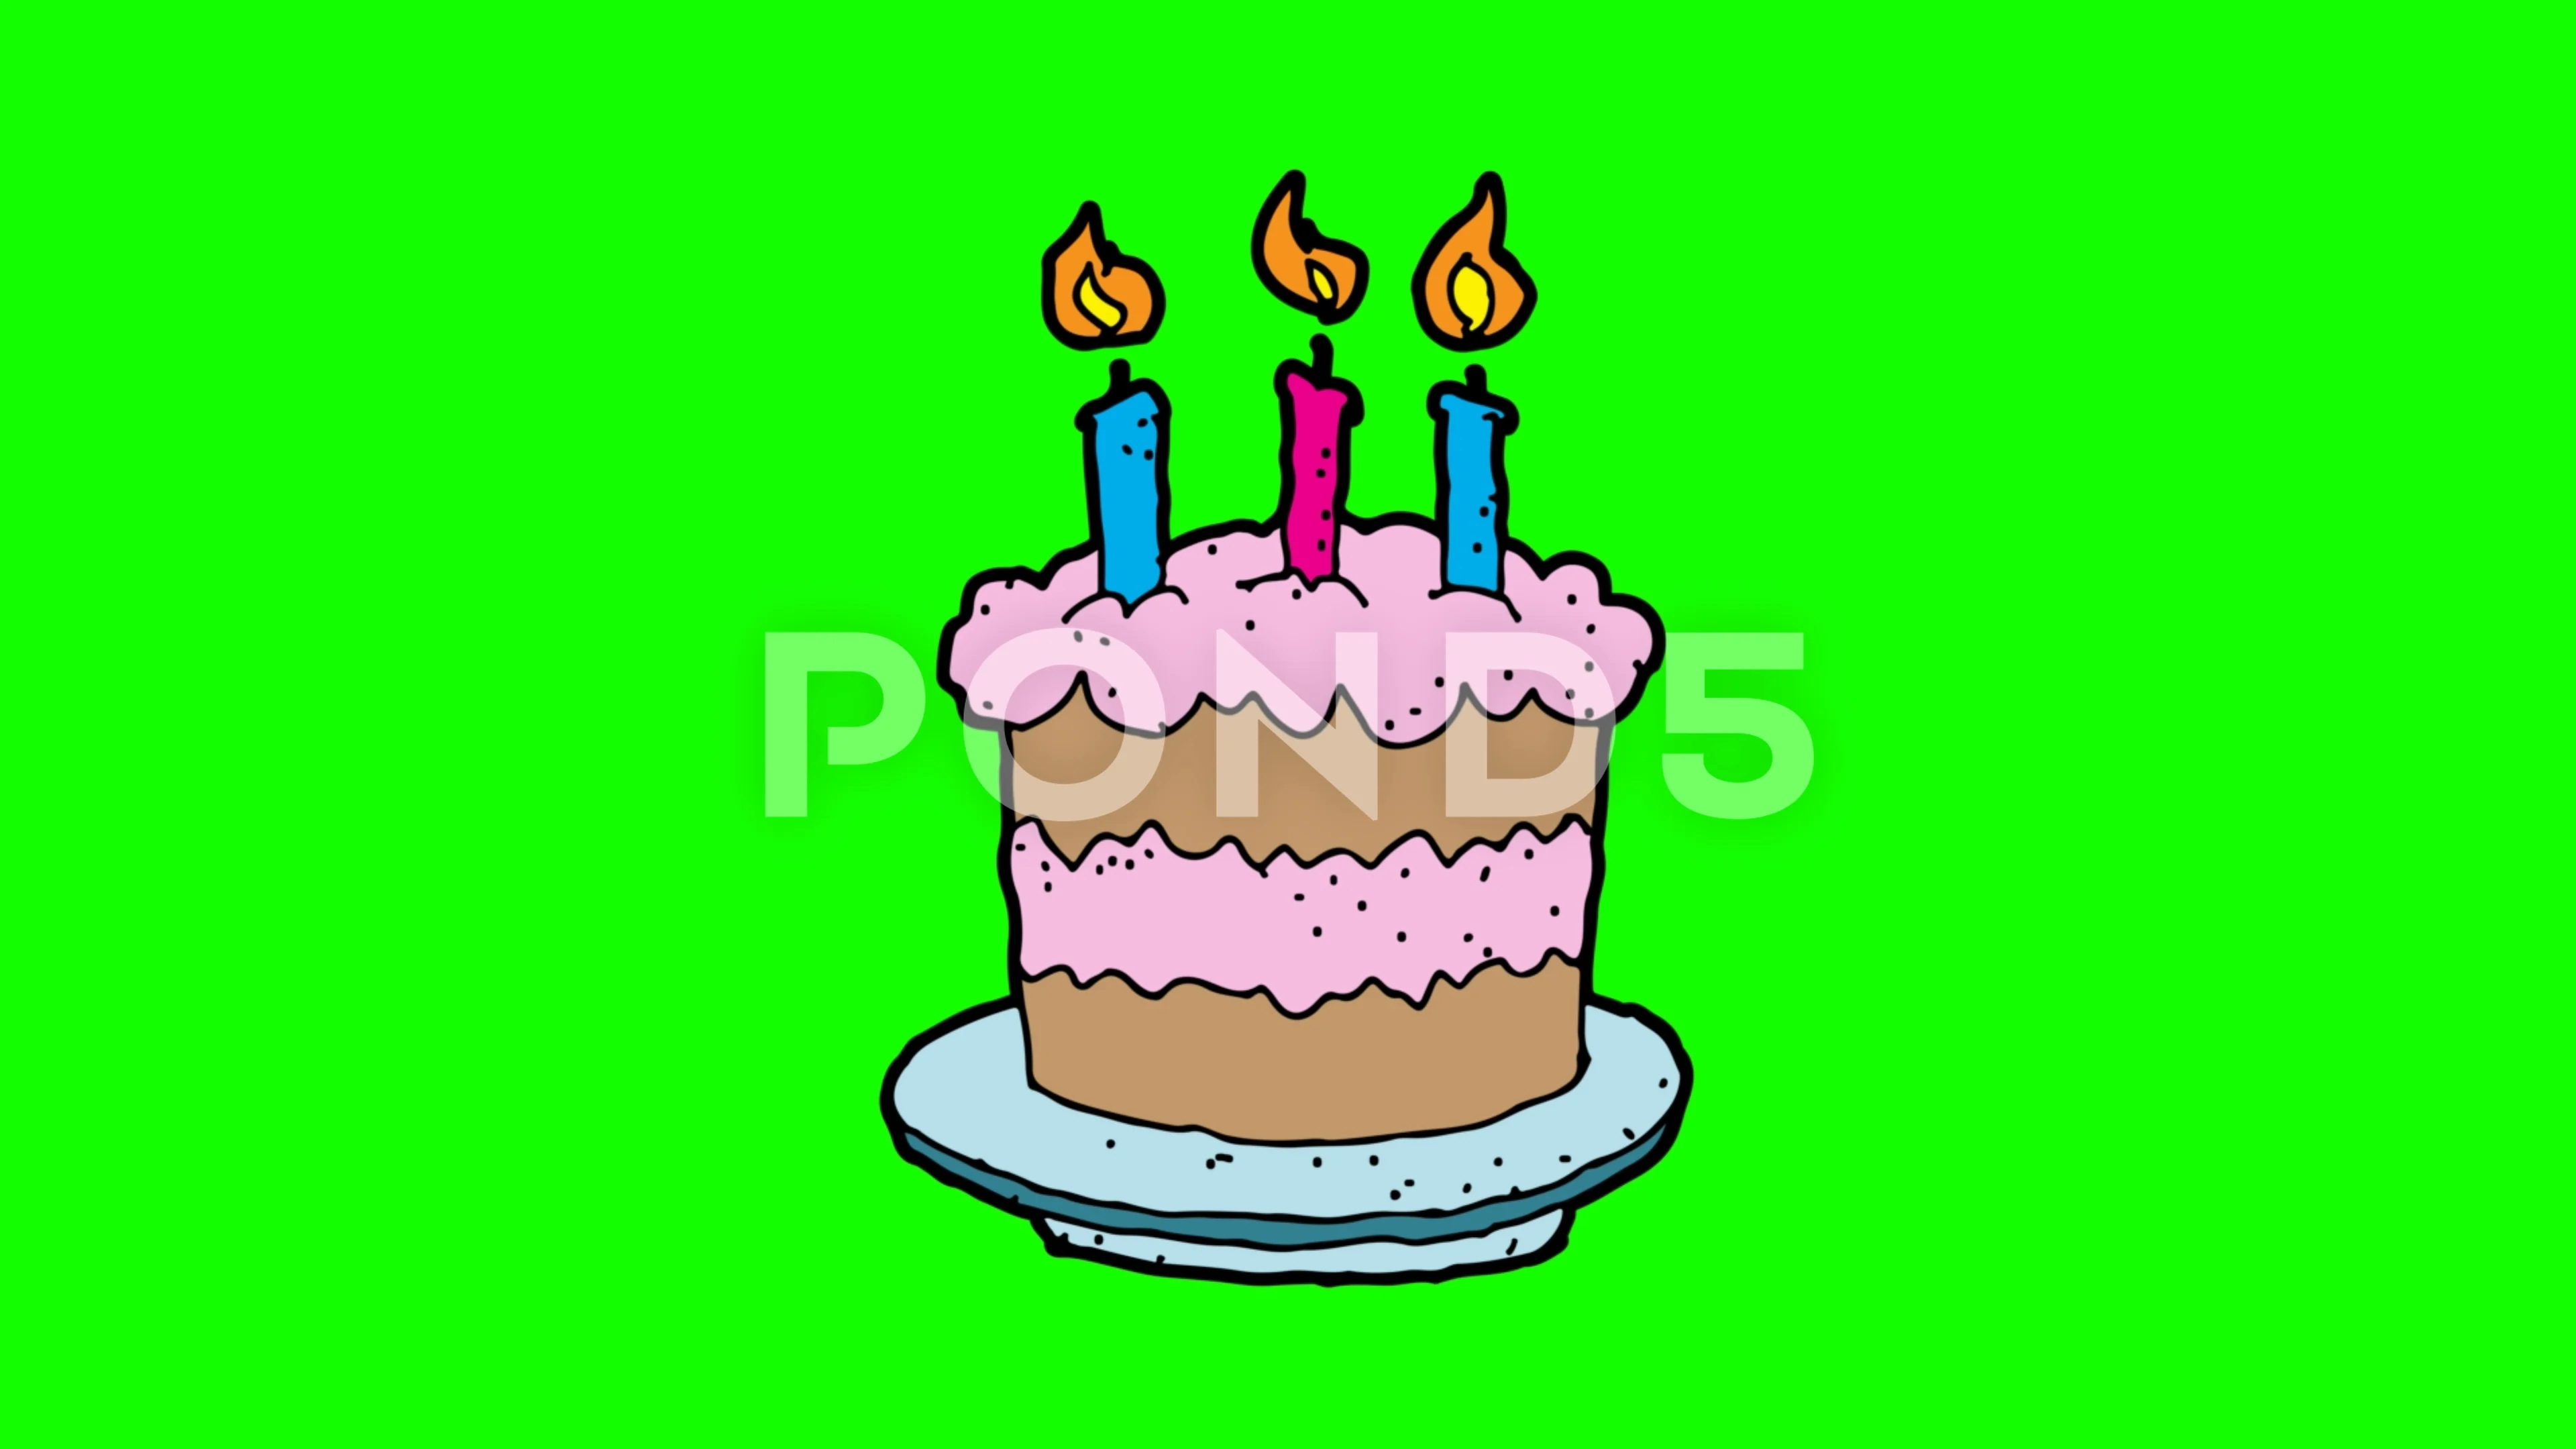 Cartoon Doodle Happy Kids Birthday Party With A Big Cake Stock Illustration  - Download Image Now - iStock